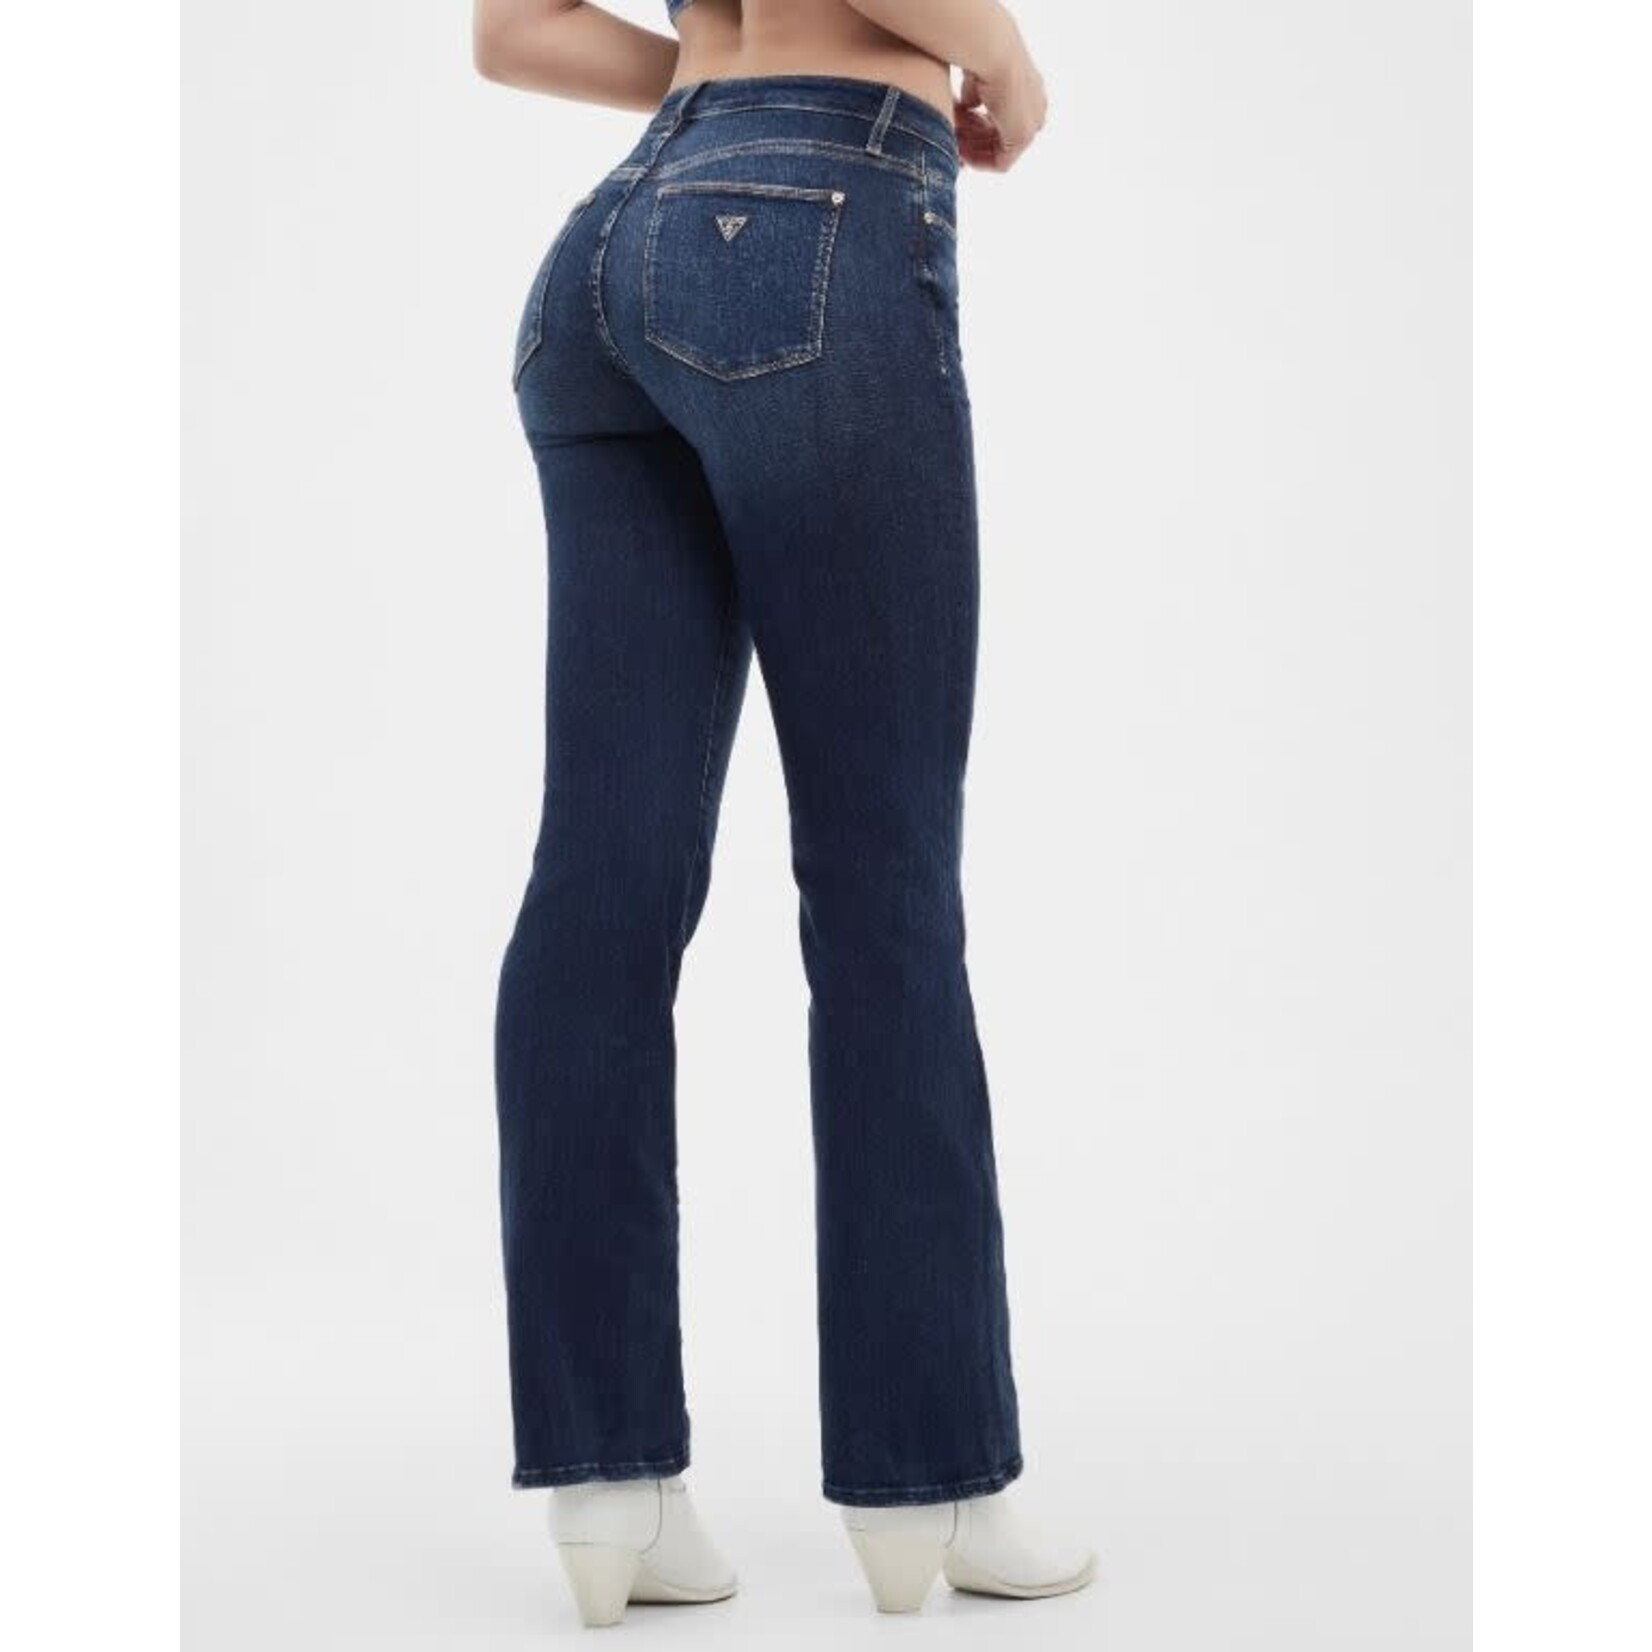 Guess Sexy Boot Jean